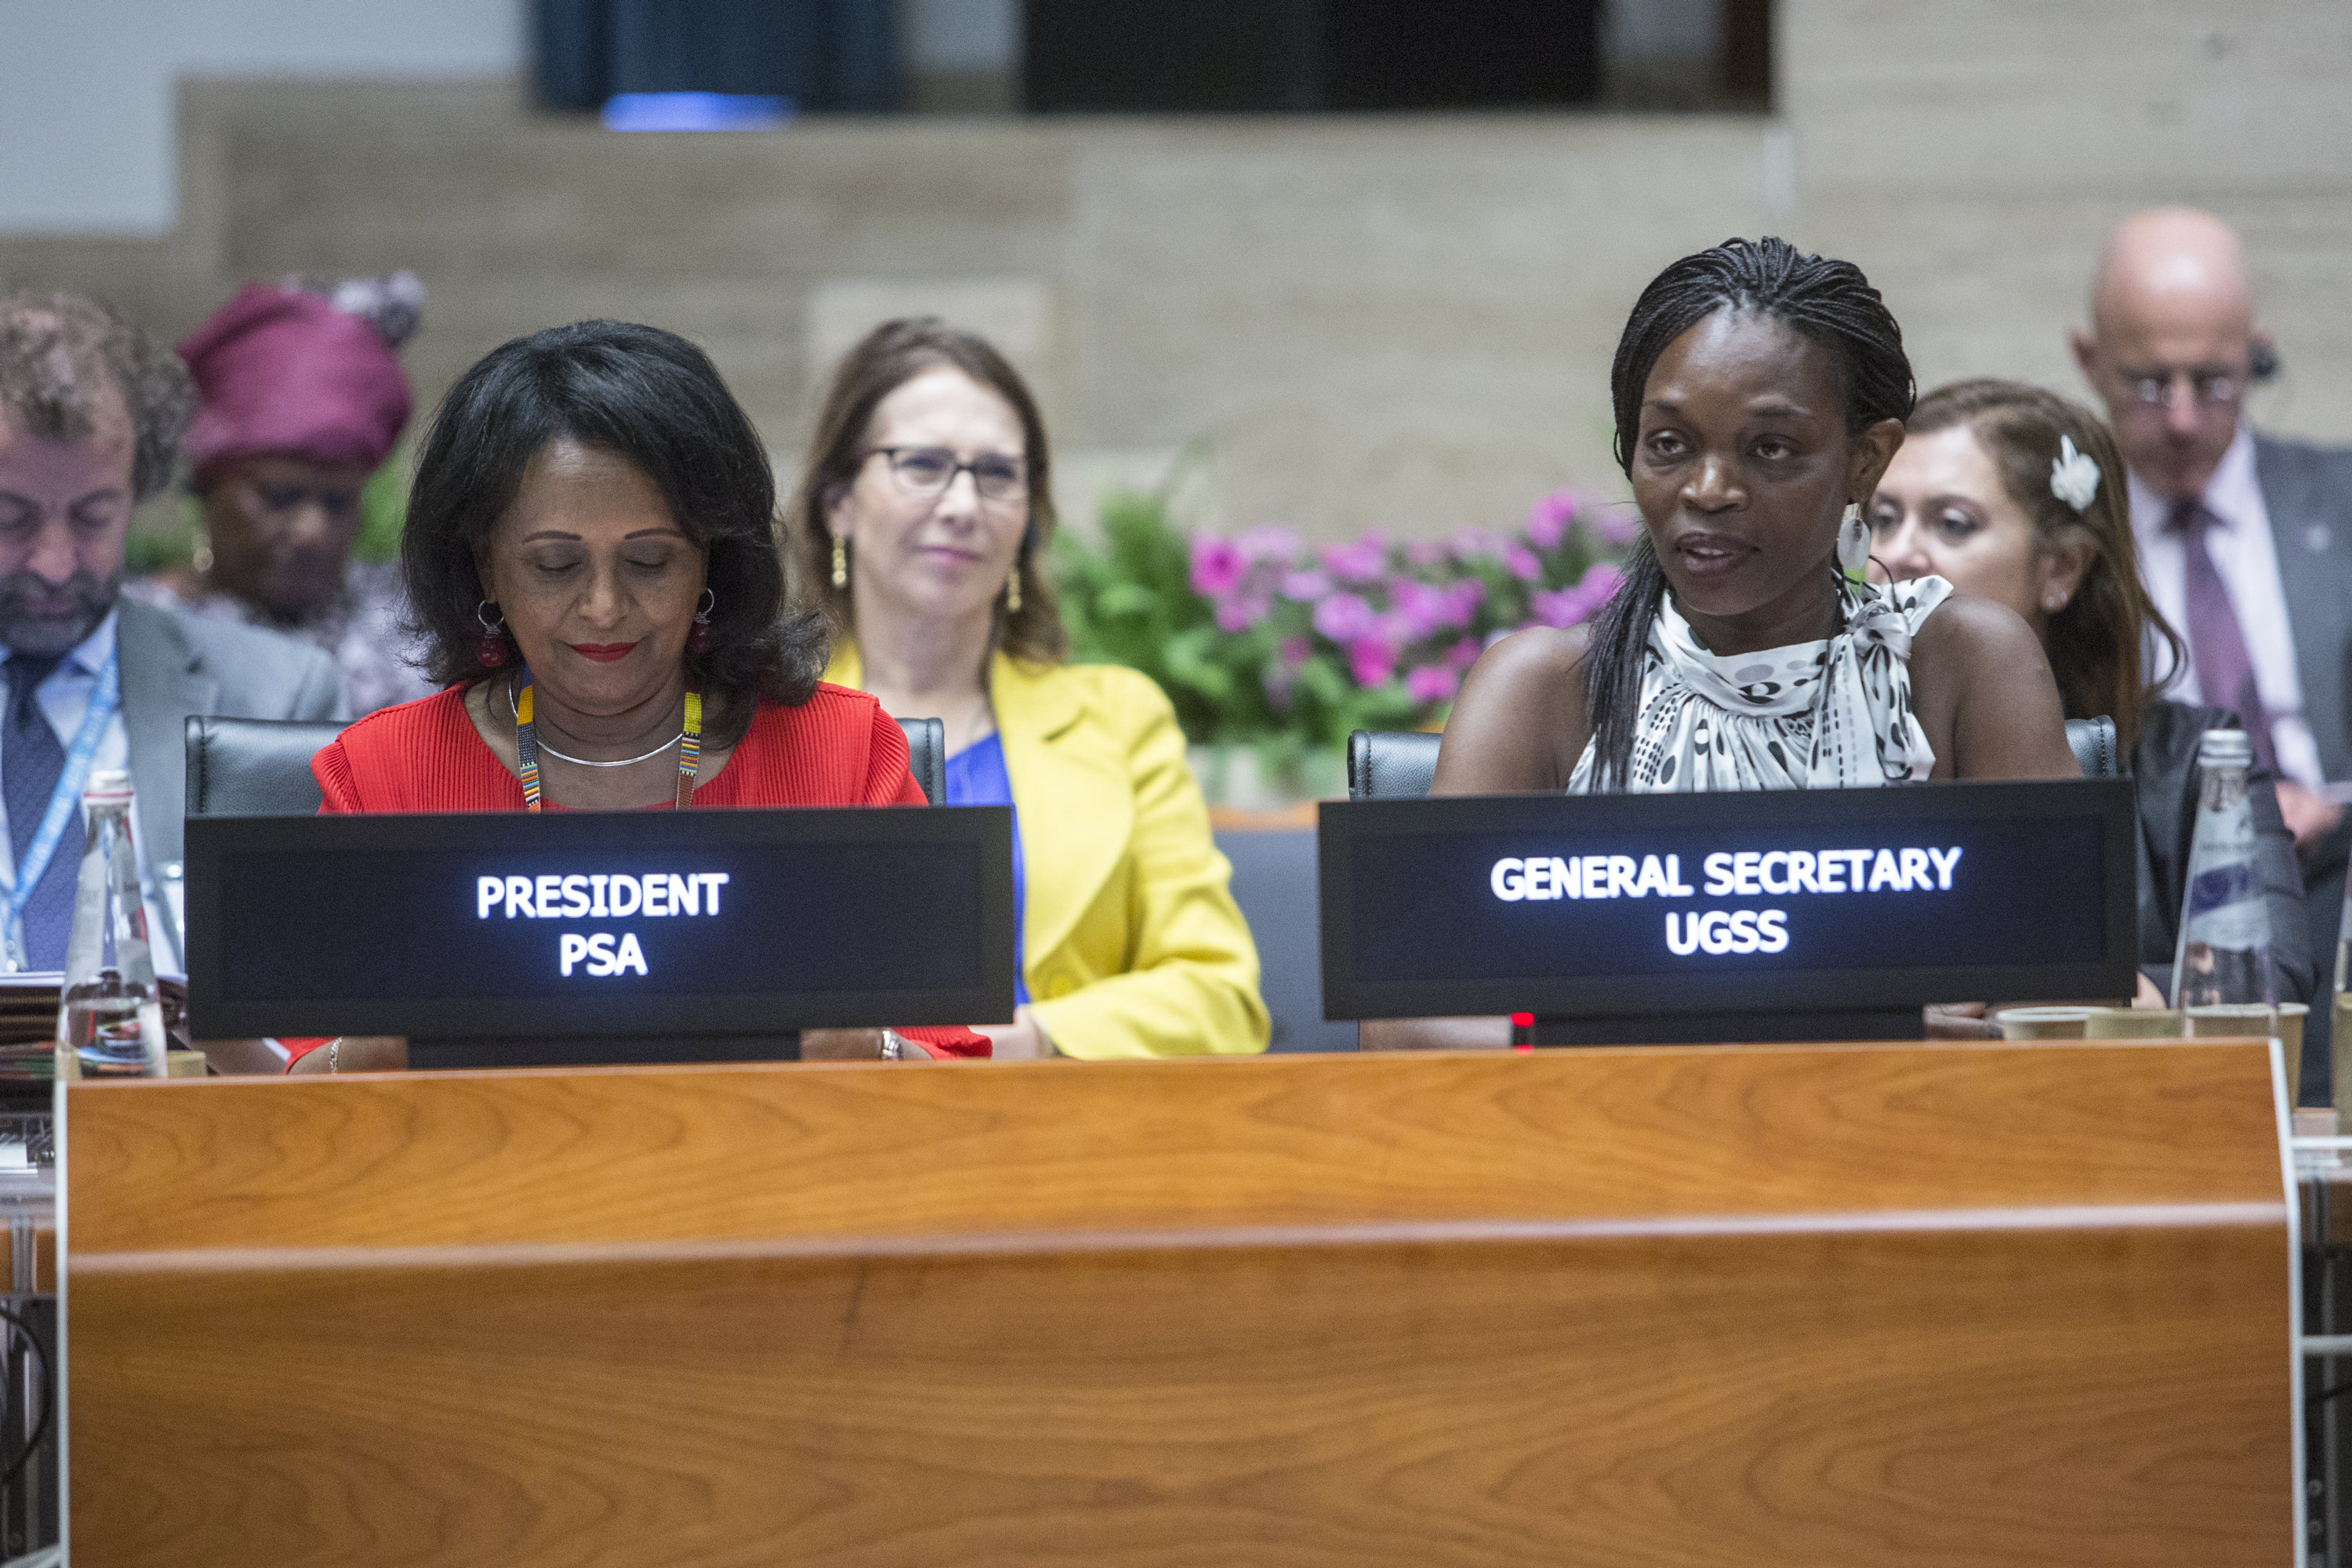 Left to right: The President of the WFP Professional Staff Association (PSA), Ms Ariam Abraha, and the General Secretary of the Union of General Service Staff of FAO and WFP (UGSS), Ms Susan Murray, addressing the Board. Photo: WFP/Giulio Napolitano